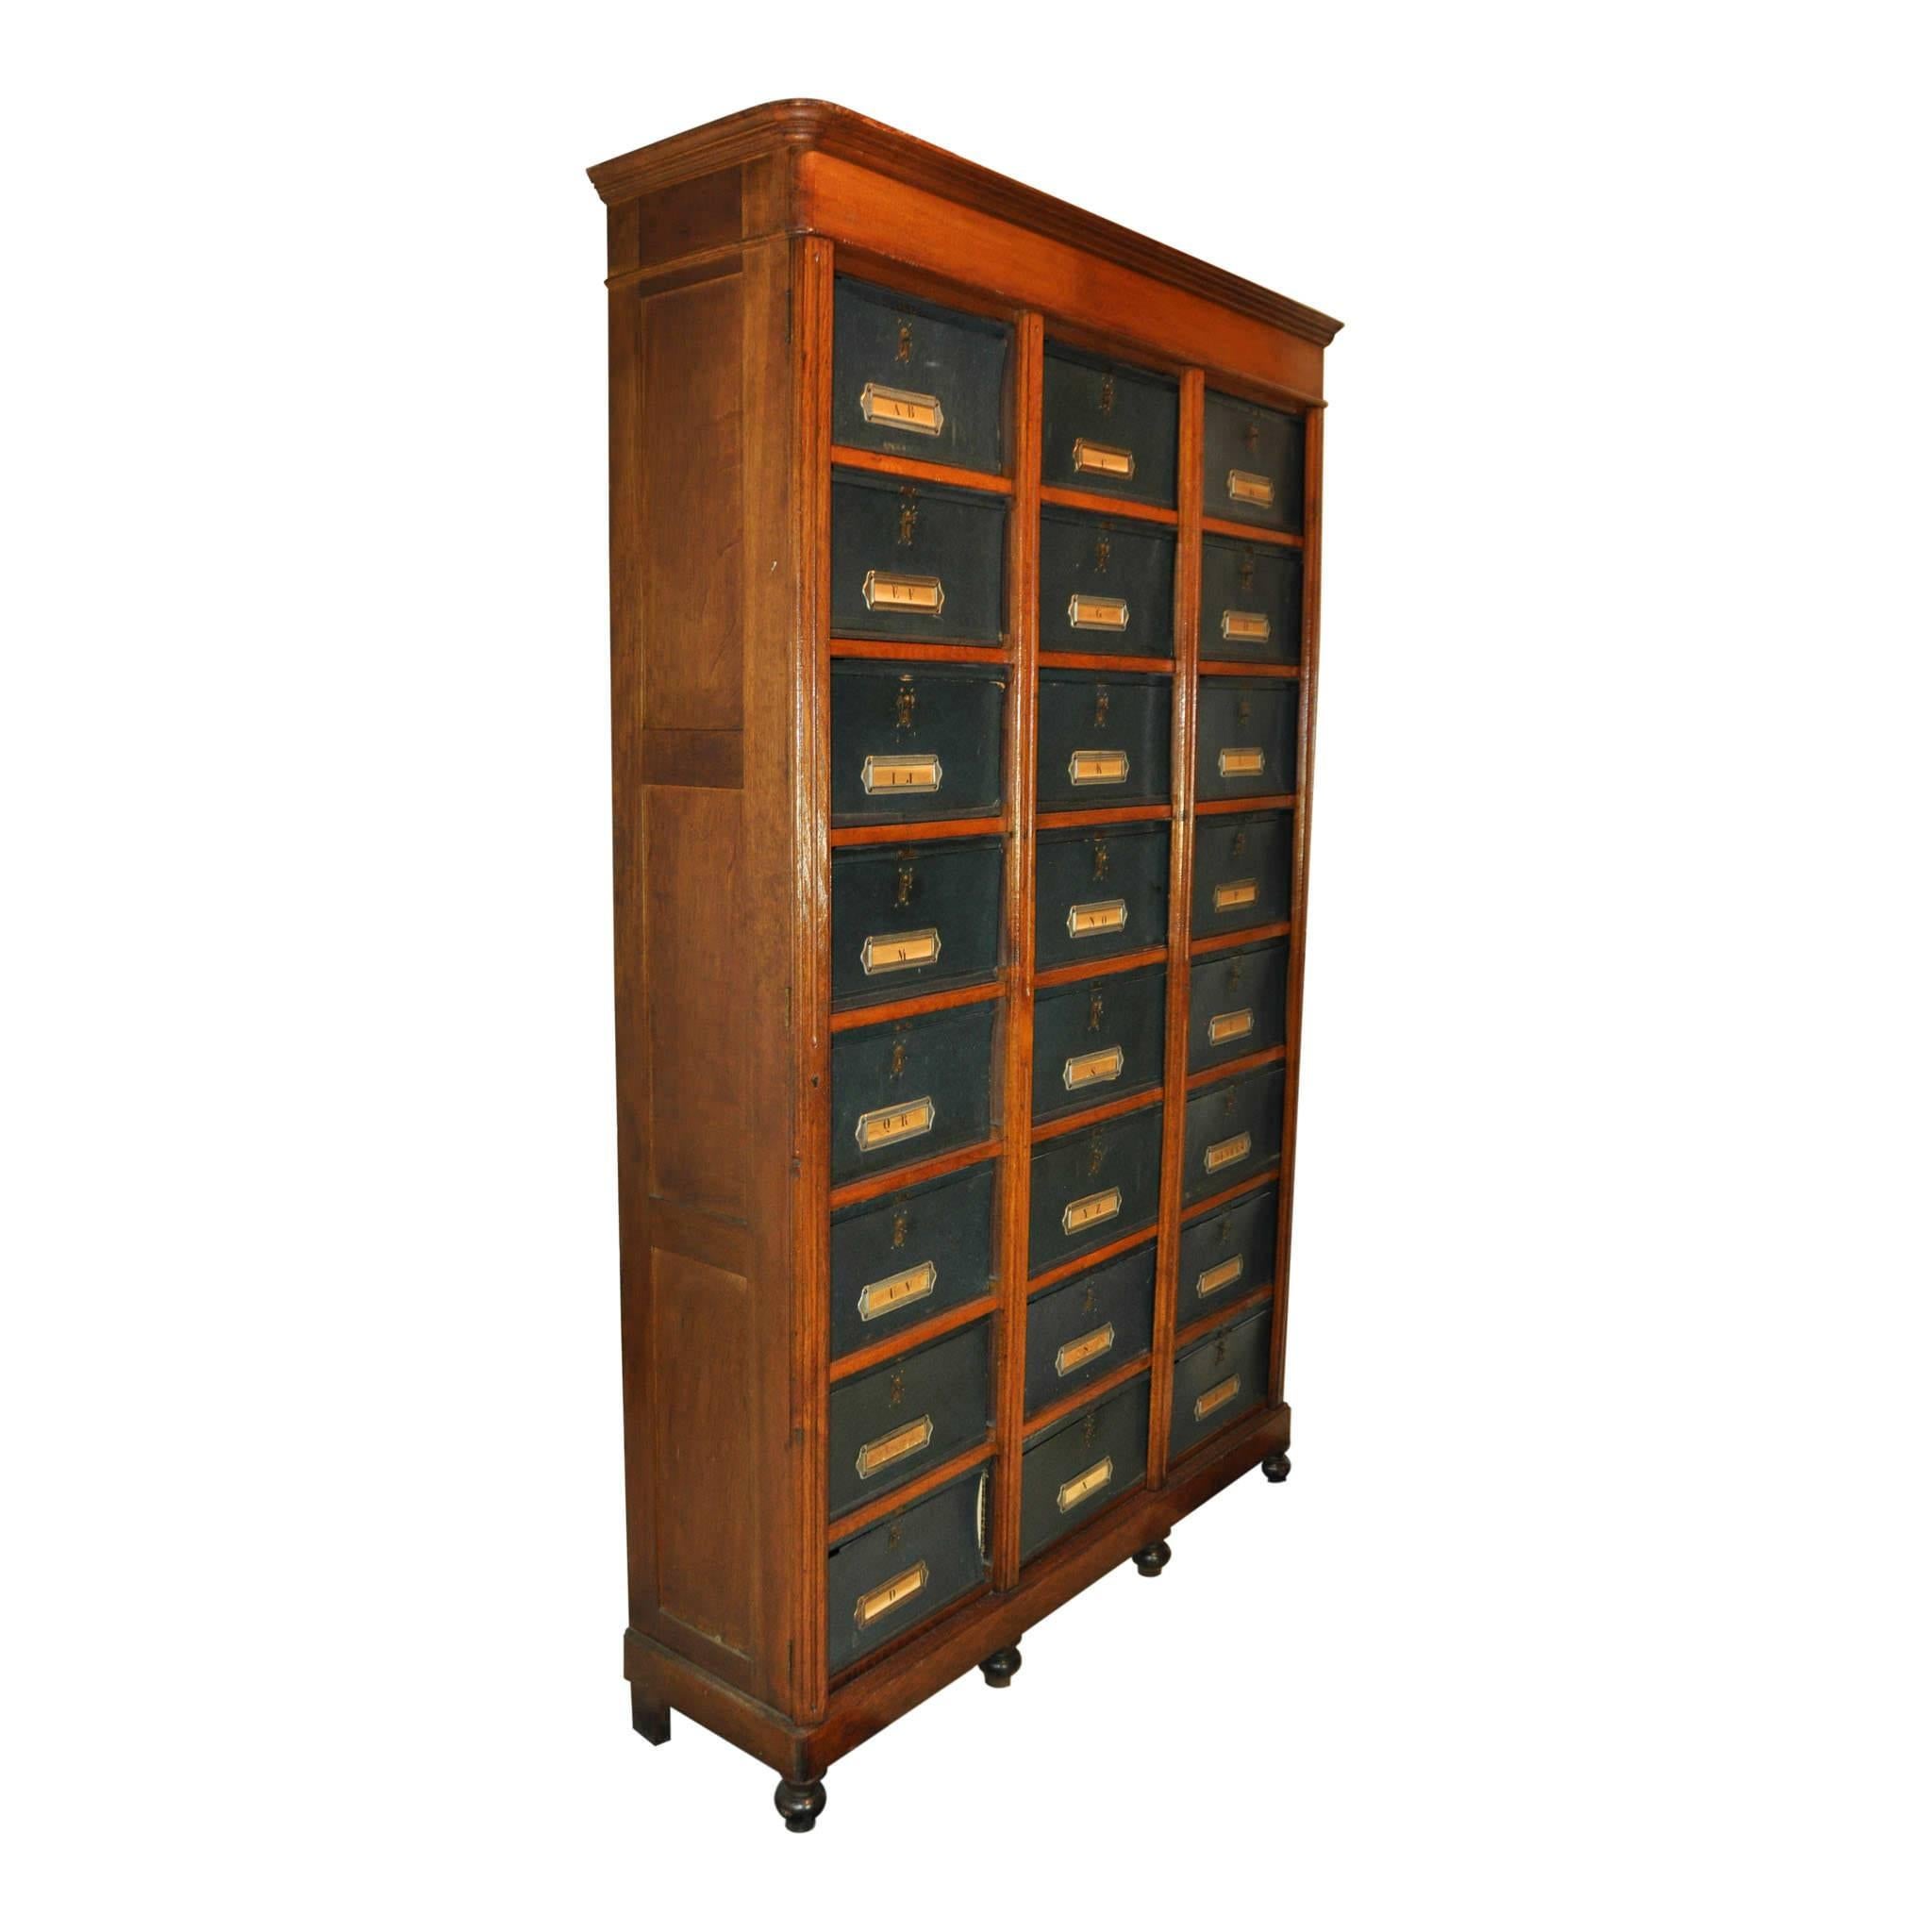 Plenty of space is available in this 24-door file cabinet. Each removable box has a fold down door. The centre and outer trim panels lock keeping the boxes secured. Because of the size of this piece it was likely owned by a lawyer or accountant. One